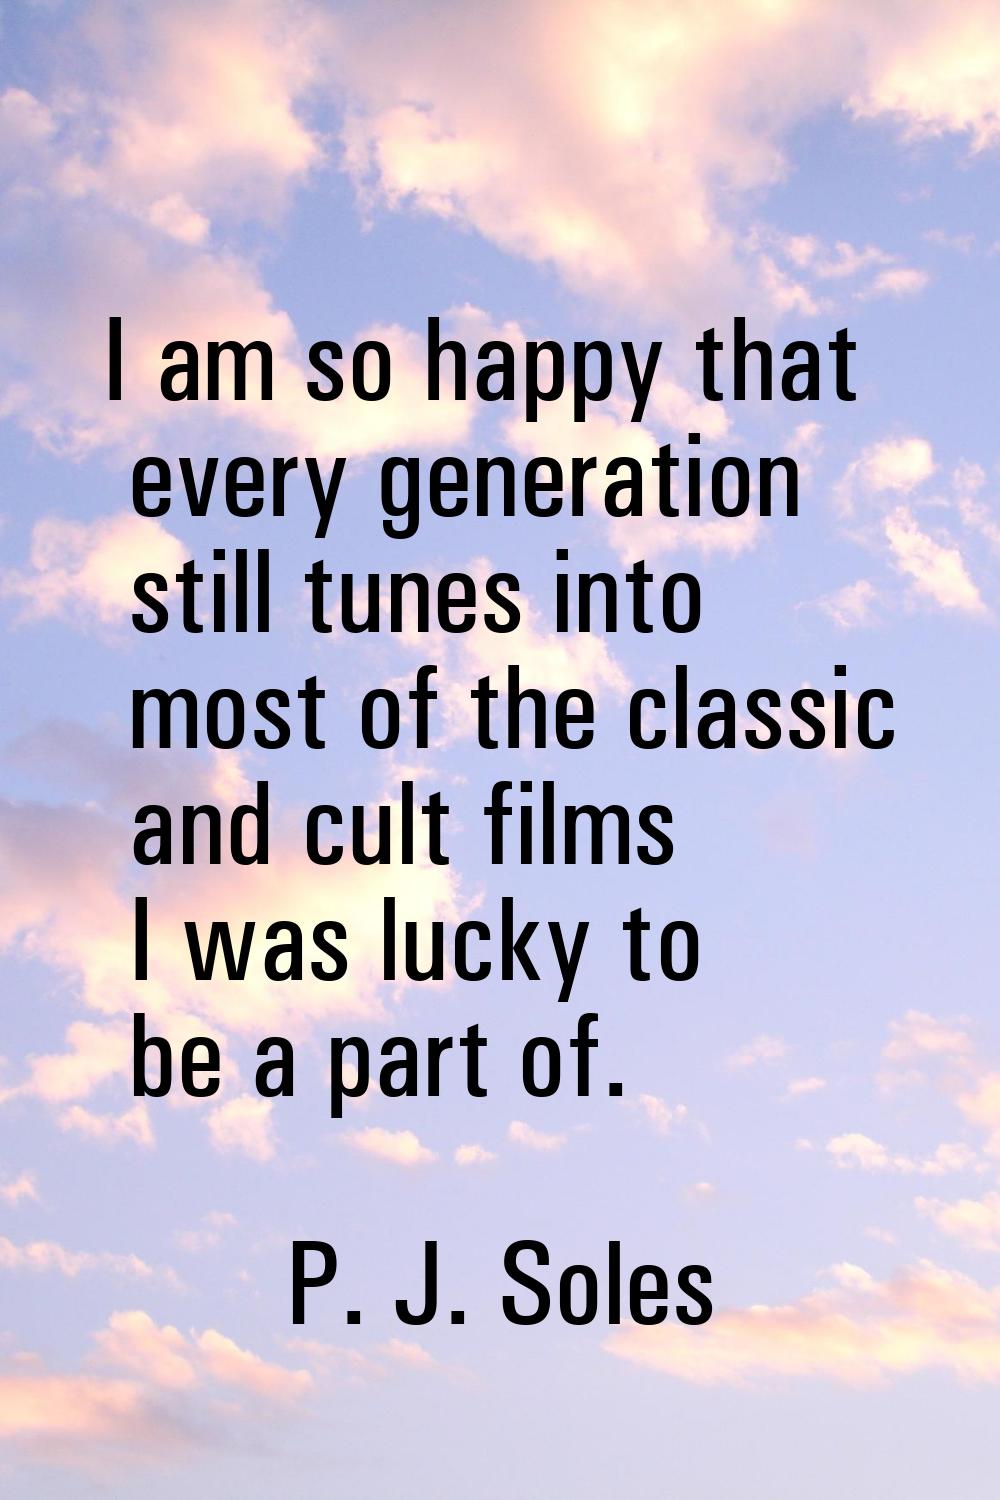 I am so happy that every generation still tunes into most of the classic and cult films I was lucky